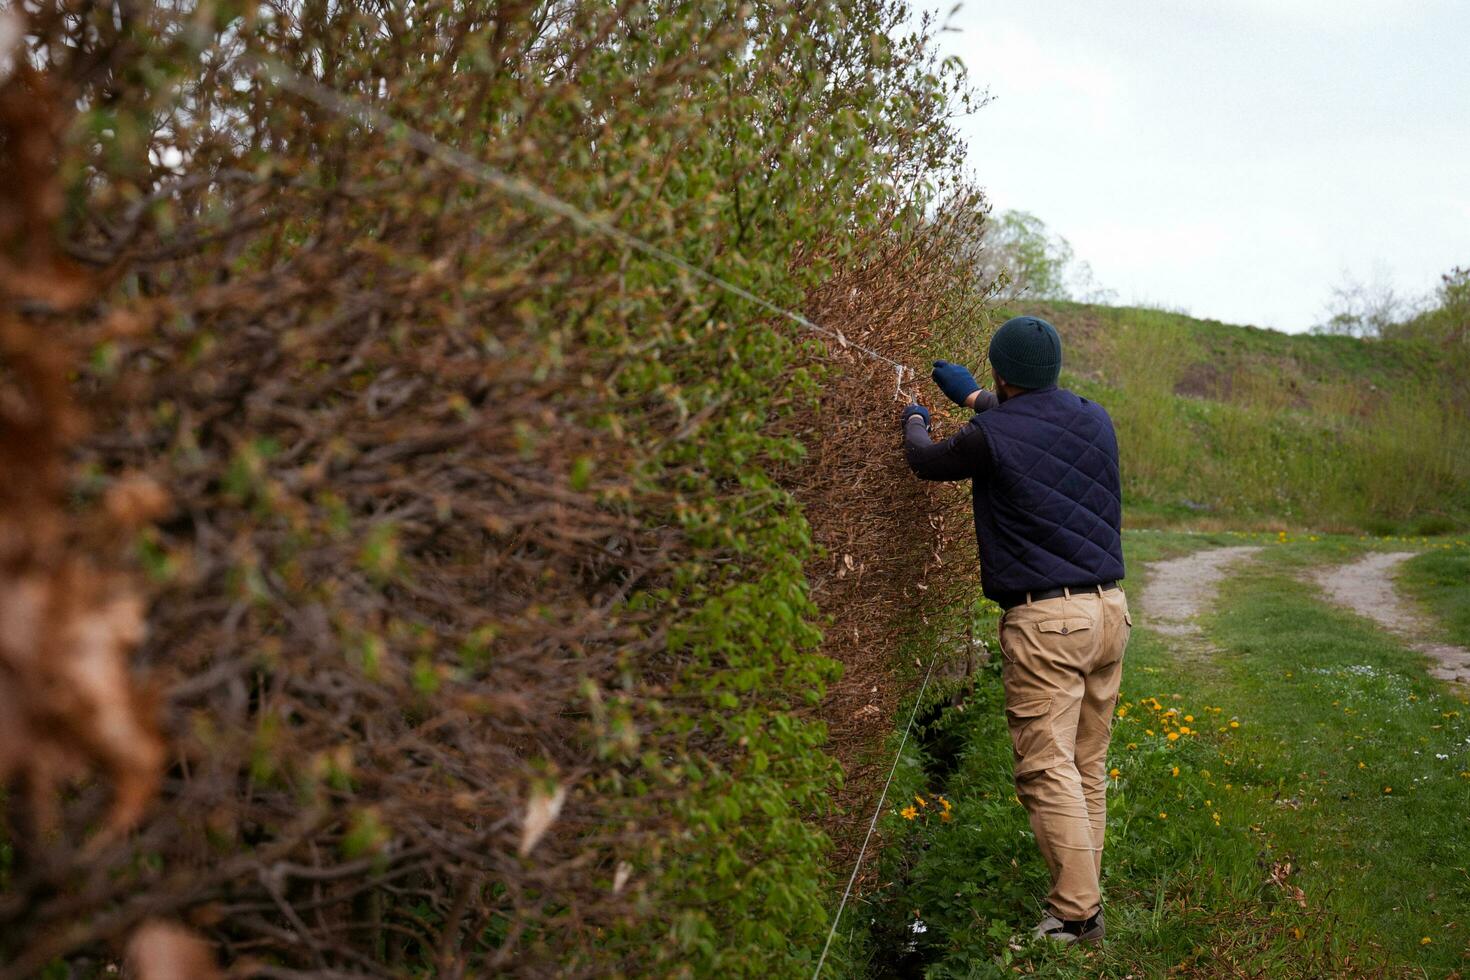 A male gardener trims a hedge in early spring, leveling it with stretched laces photo